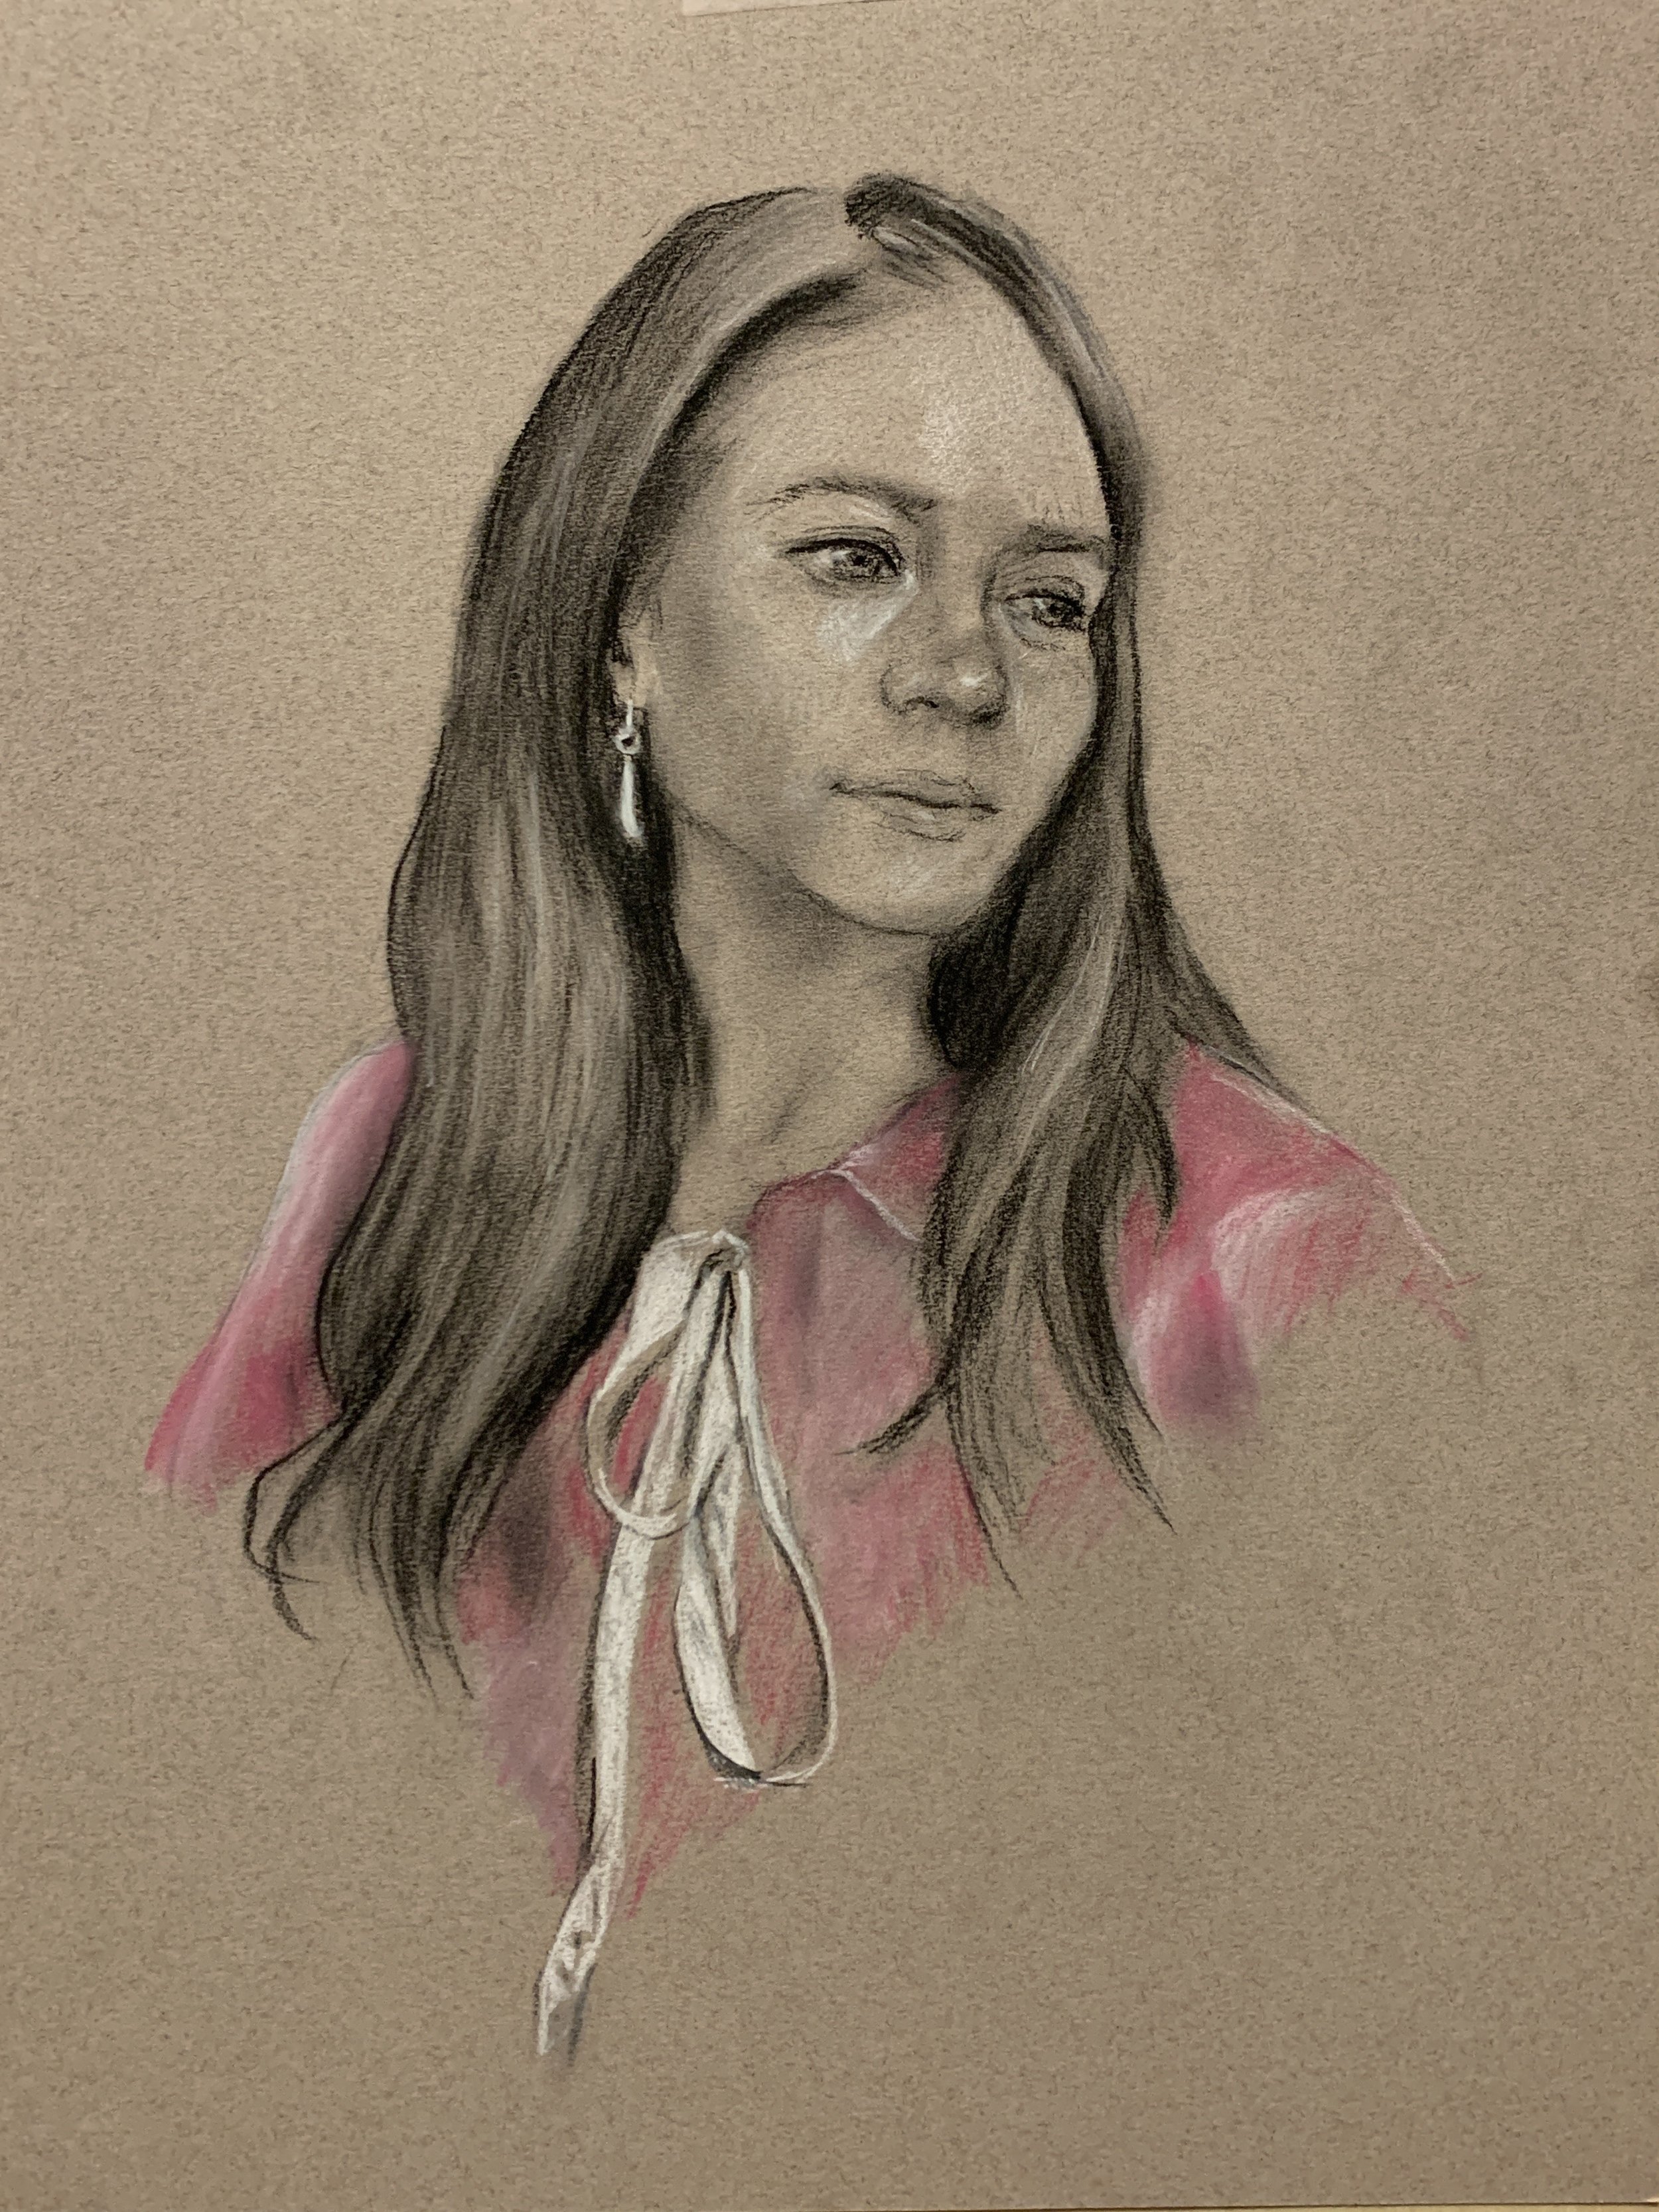 EYRA IN PINK BLOUSE, Charcoal and pastel on paper, 2024